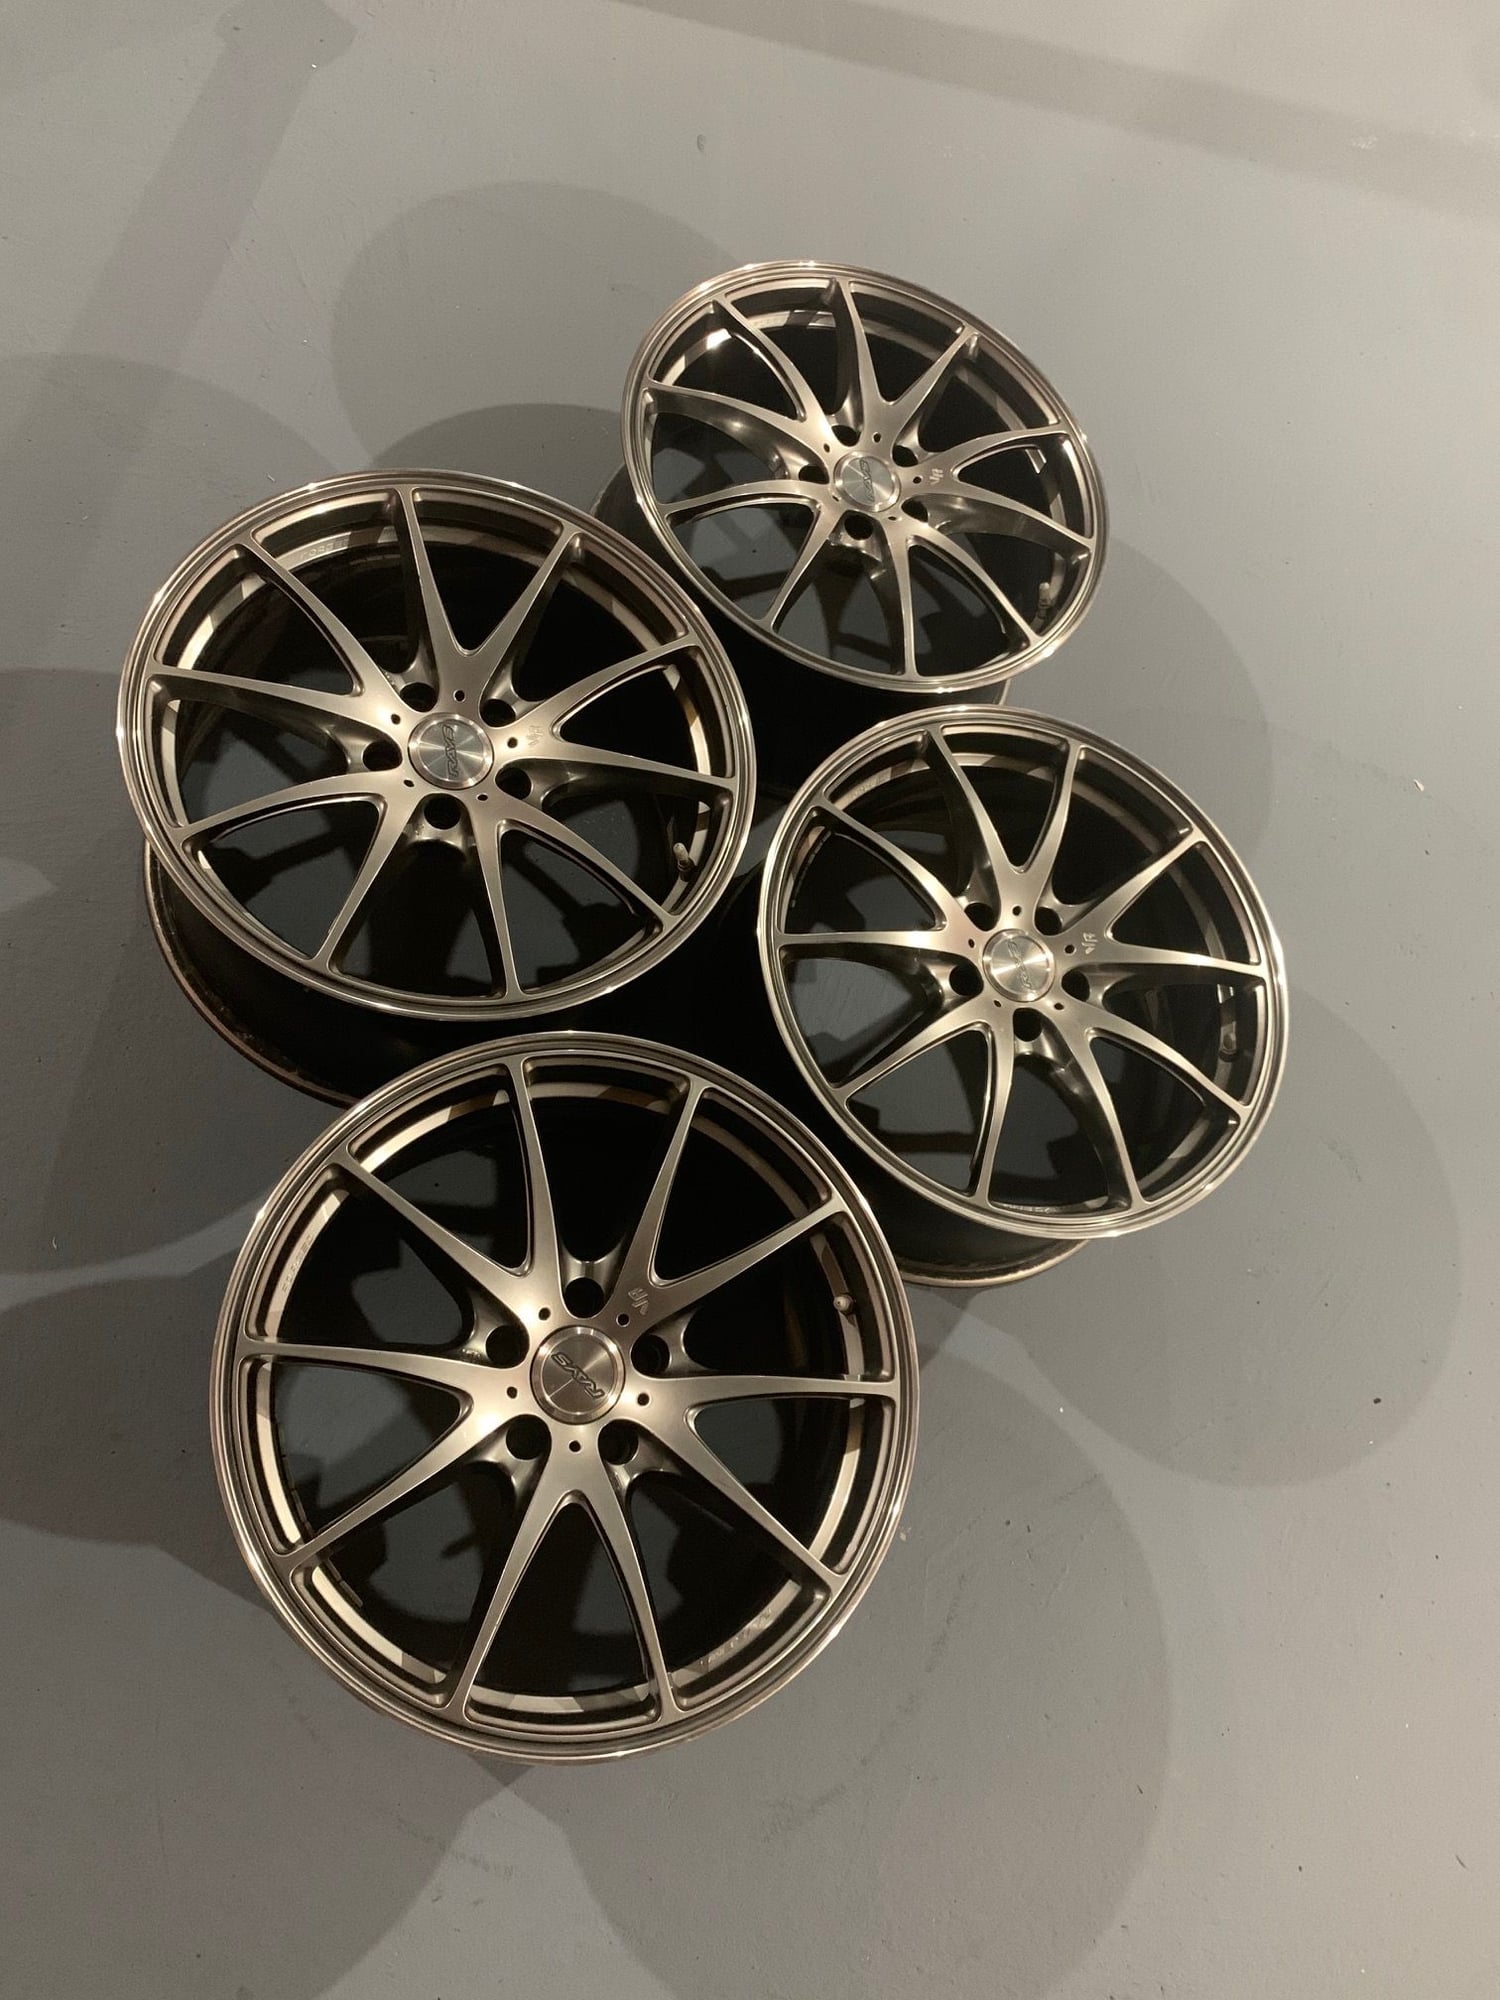 Wheels and Tires/Axles - Volk Racing G25 FORGED - Mercury Silver - 5x112 - 18 x 8 +35 18 x 9 +45 - Used - 0  All Models - Toronto, ON L4G1A6, Canada